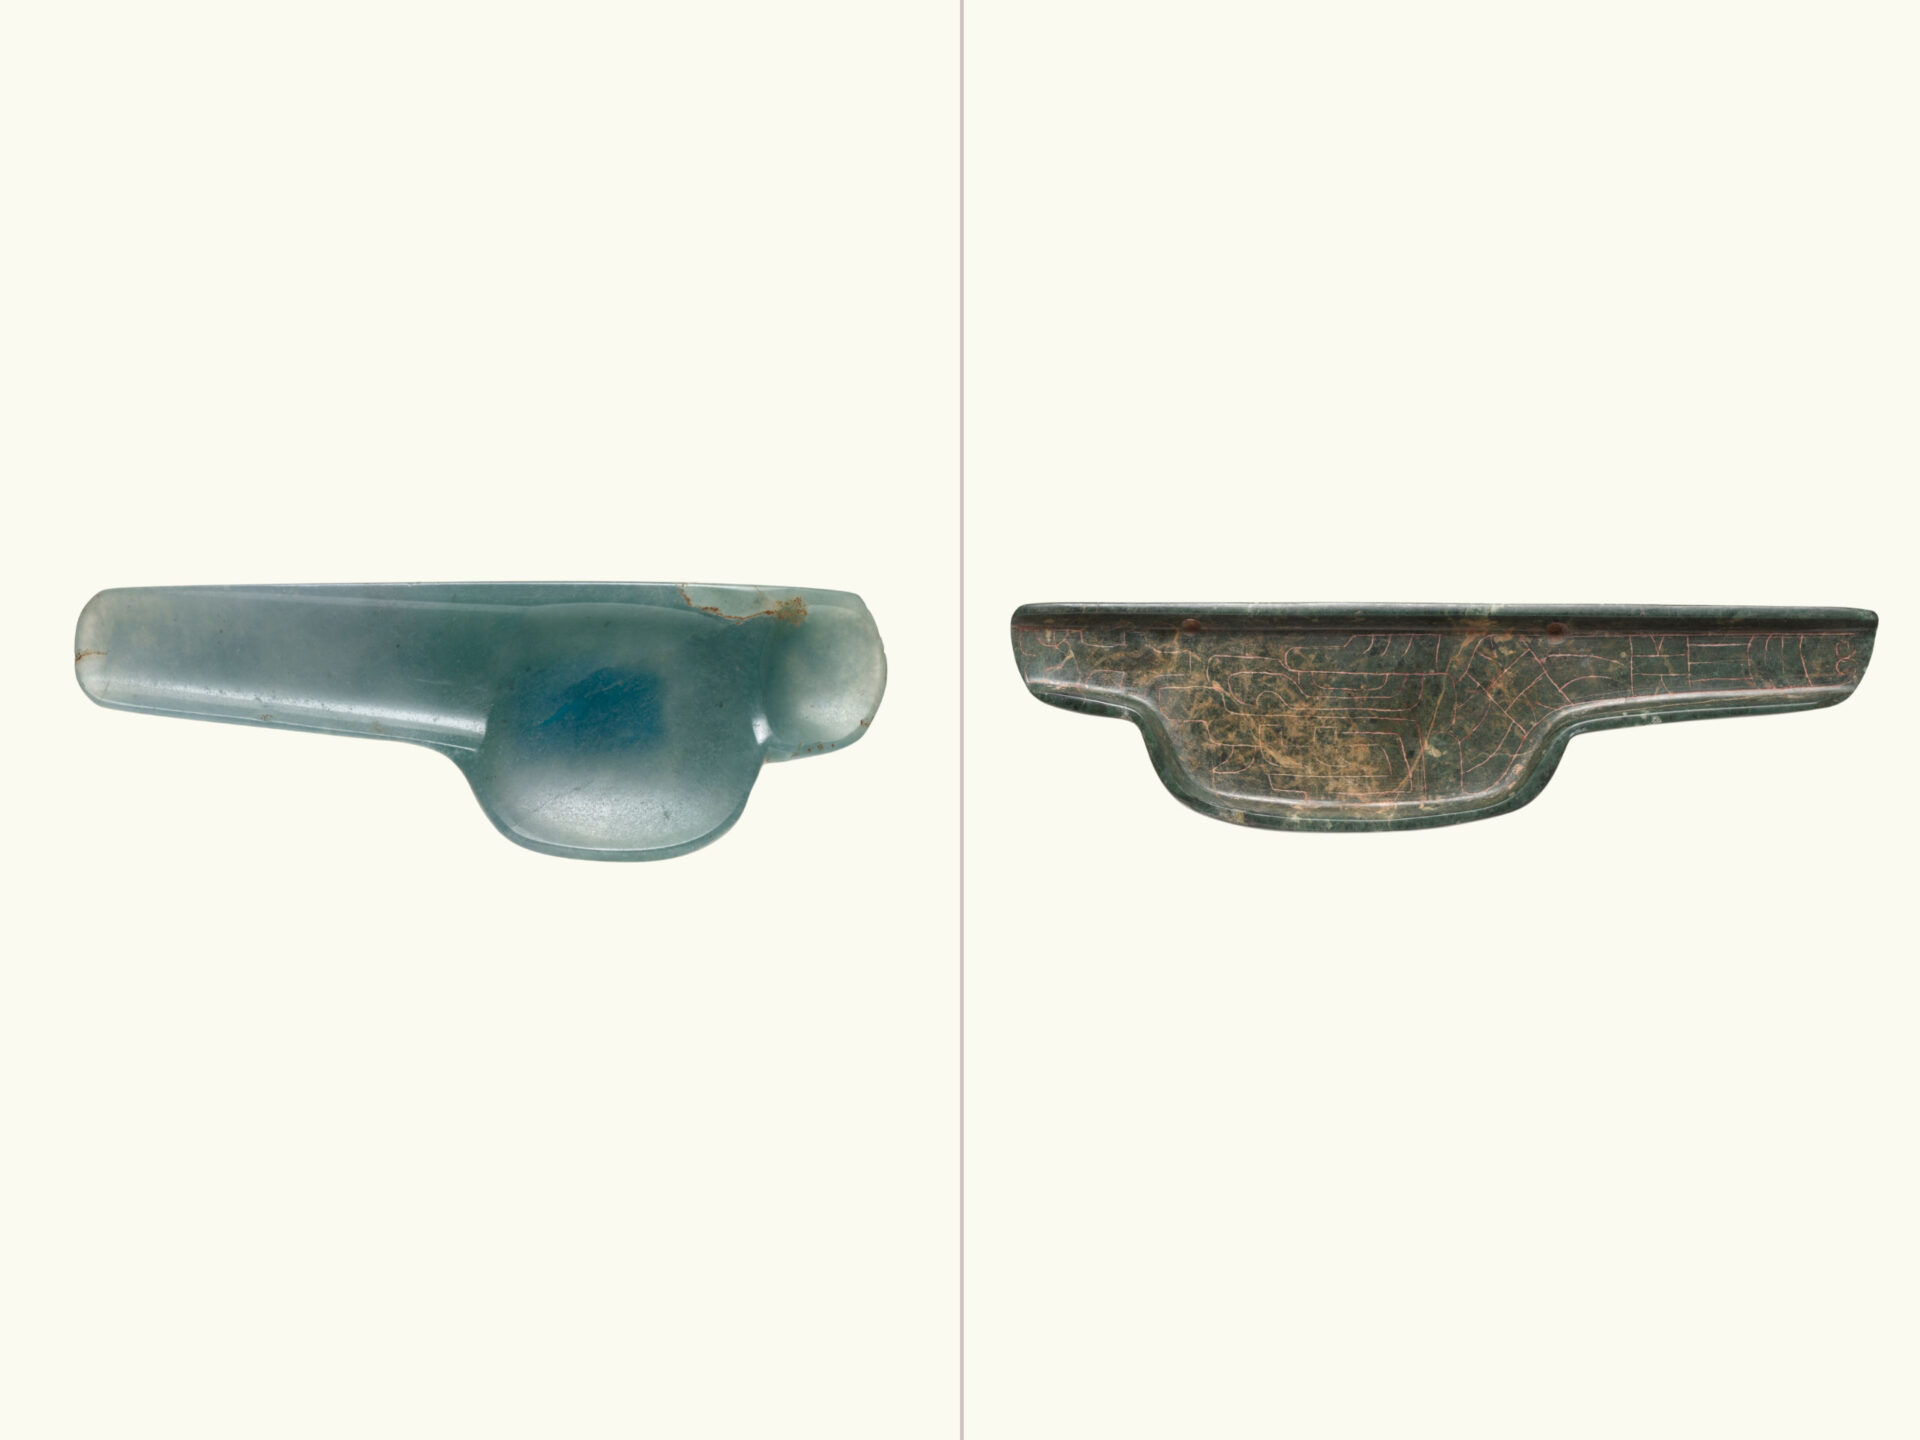 A comparison of two stone objects: blue-green jade tablet/"spoon" (left) and green stone spoon (right).